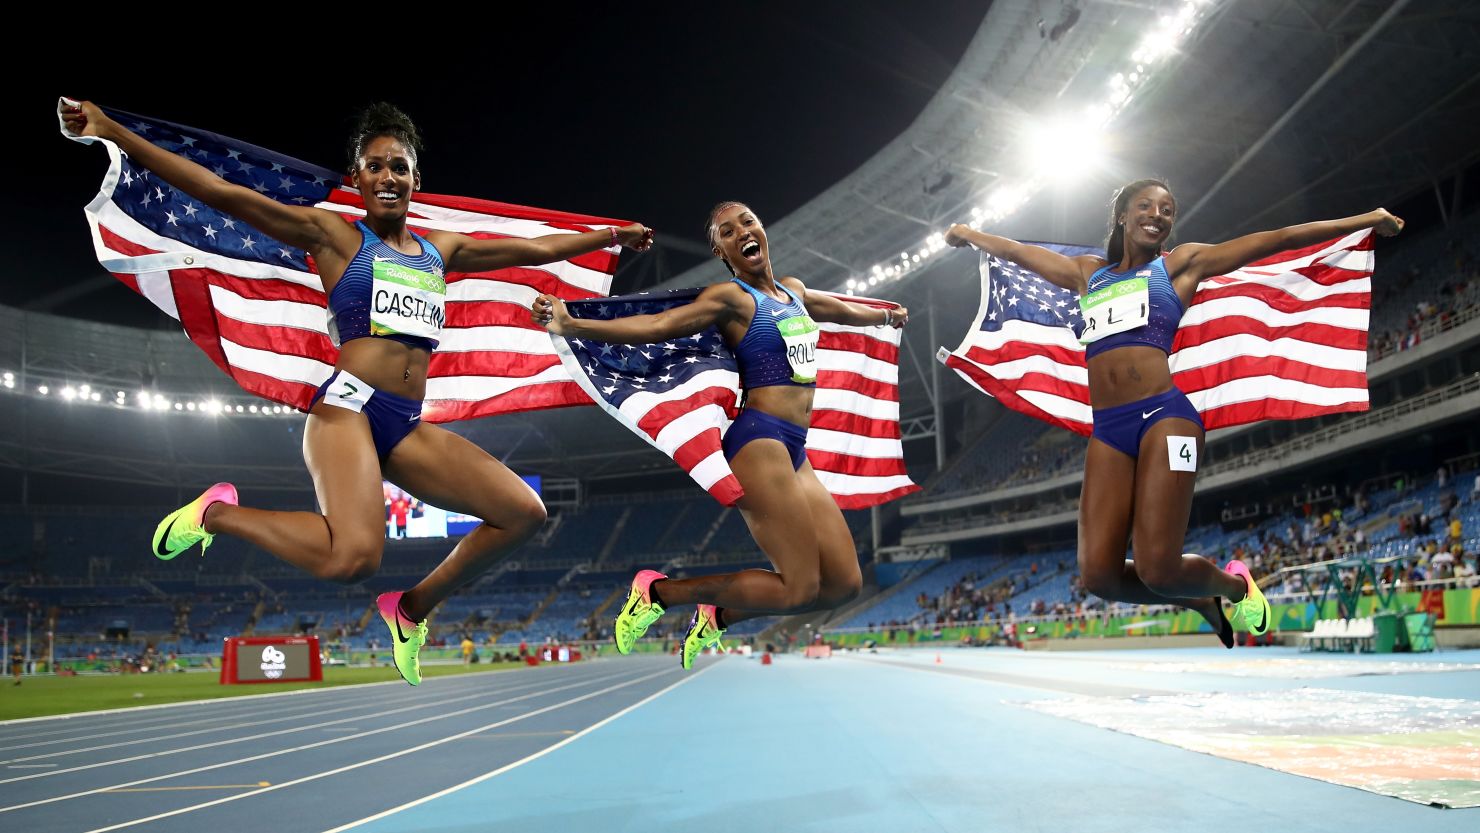 The US trio celebrated after their stunning hurdles success.